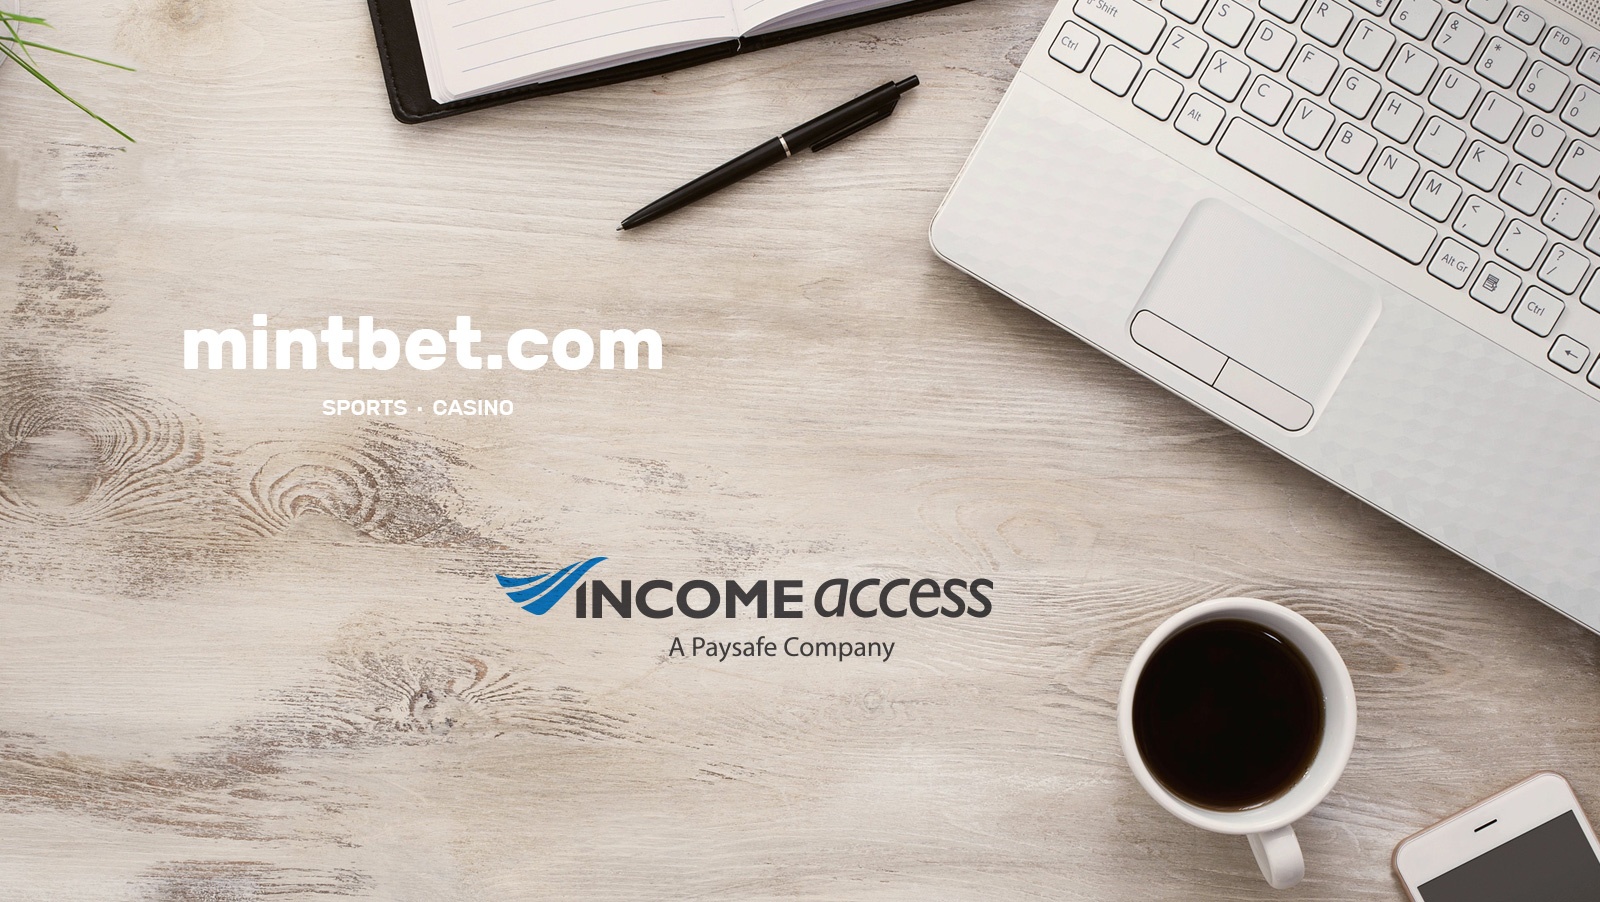 MintBet launches affiliate programme with Income Access